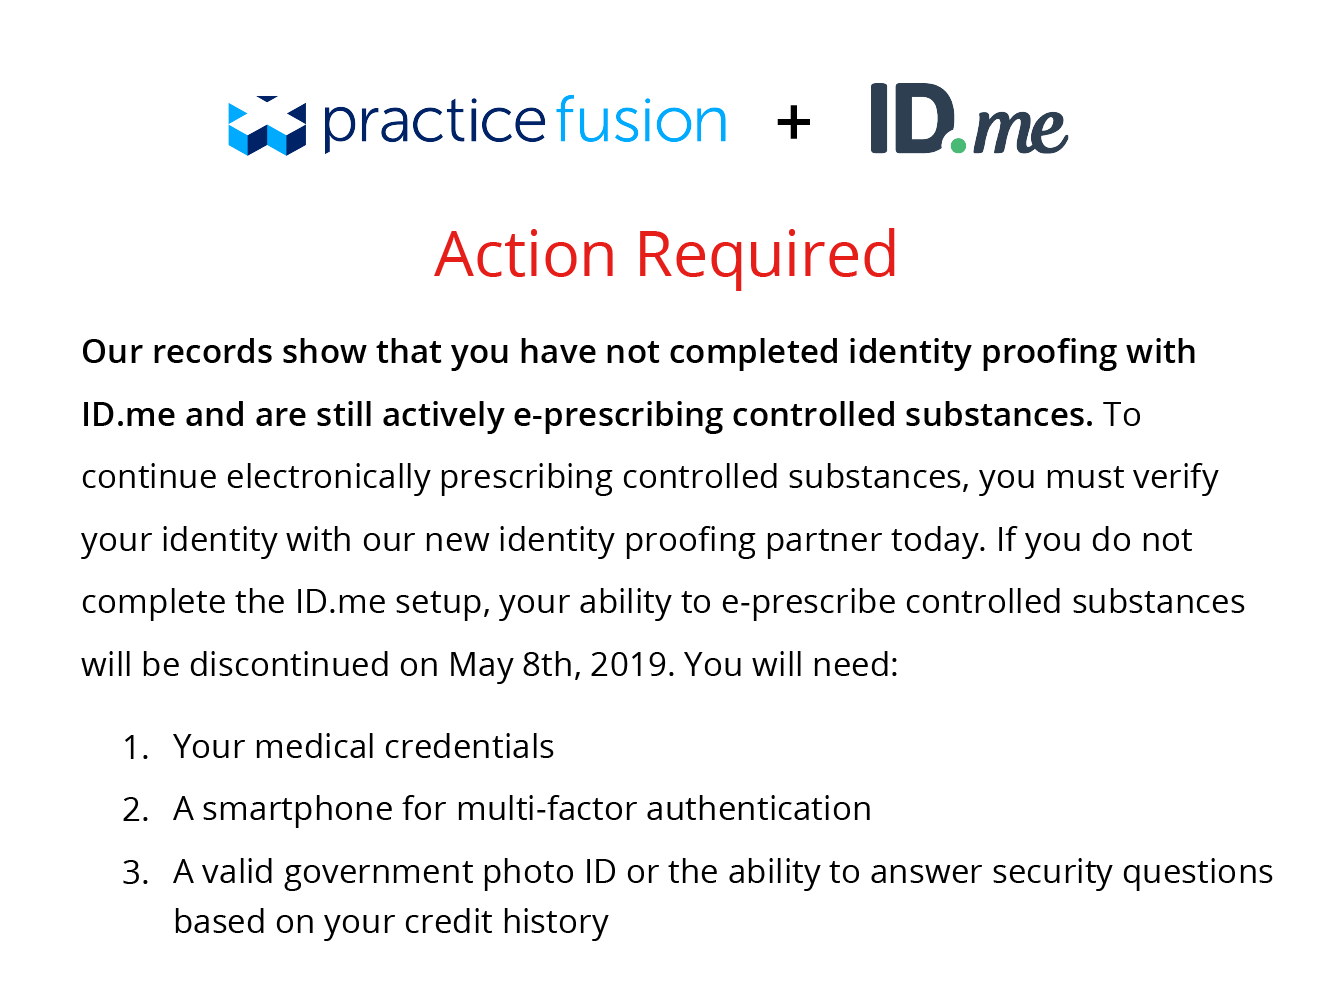 Our record show that you have not completed identity proofing with ID.me and are still actively e-prescribing controlled substances